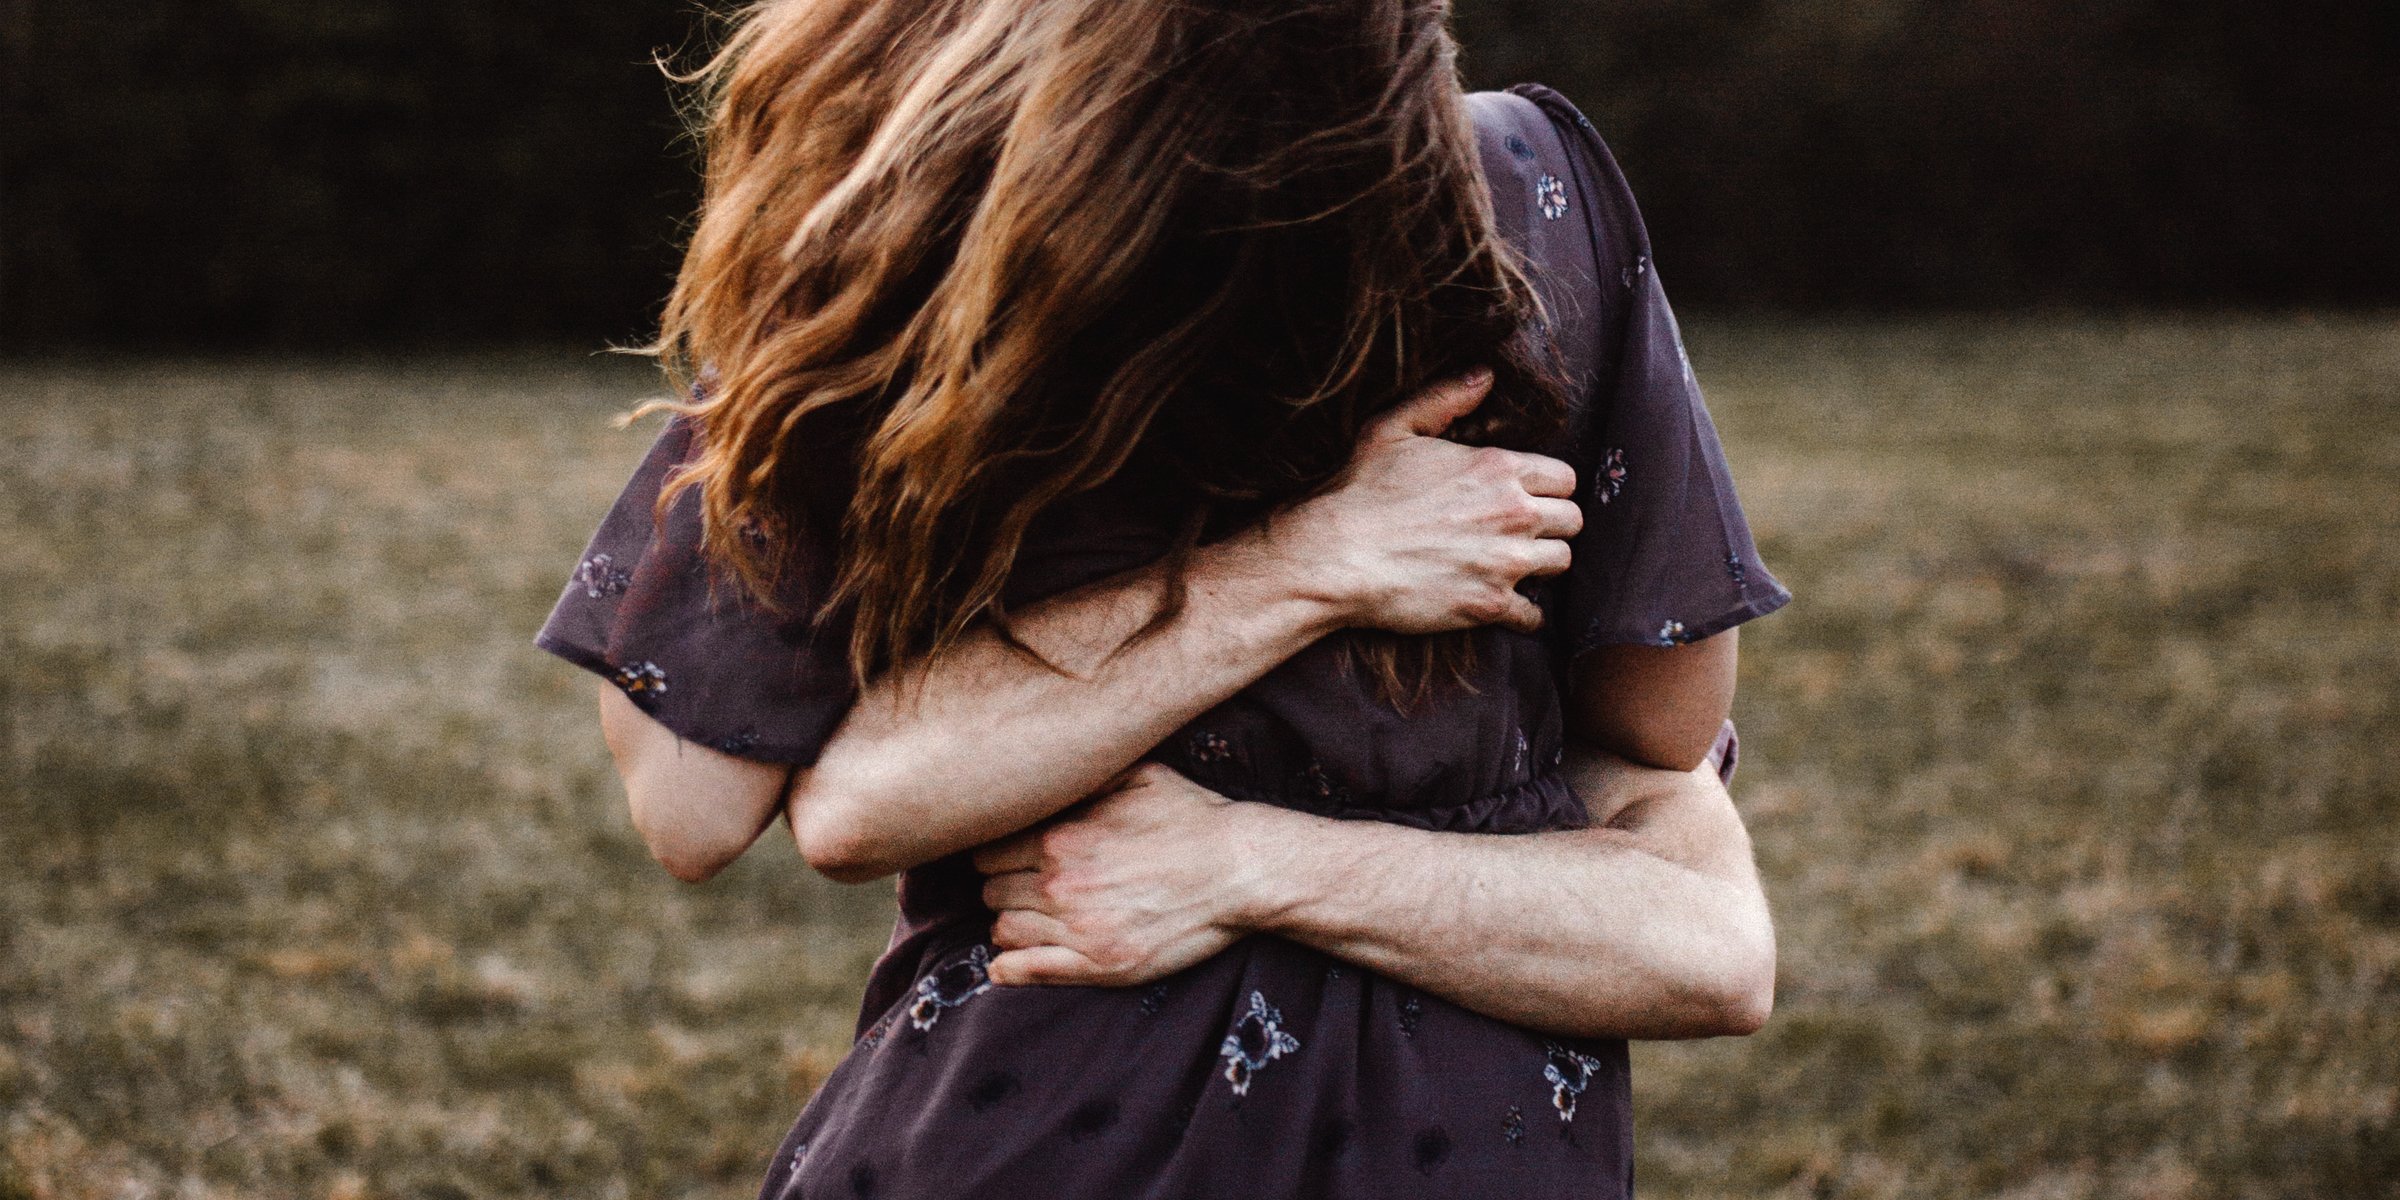 Unsplash | A man and a woman hugging